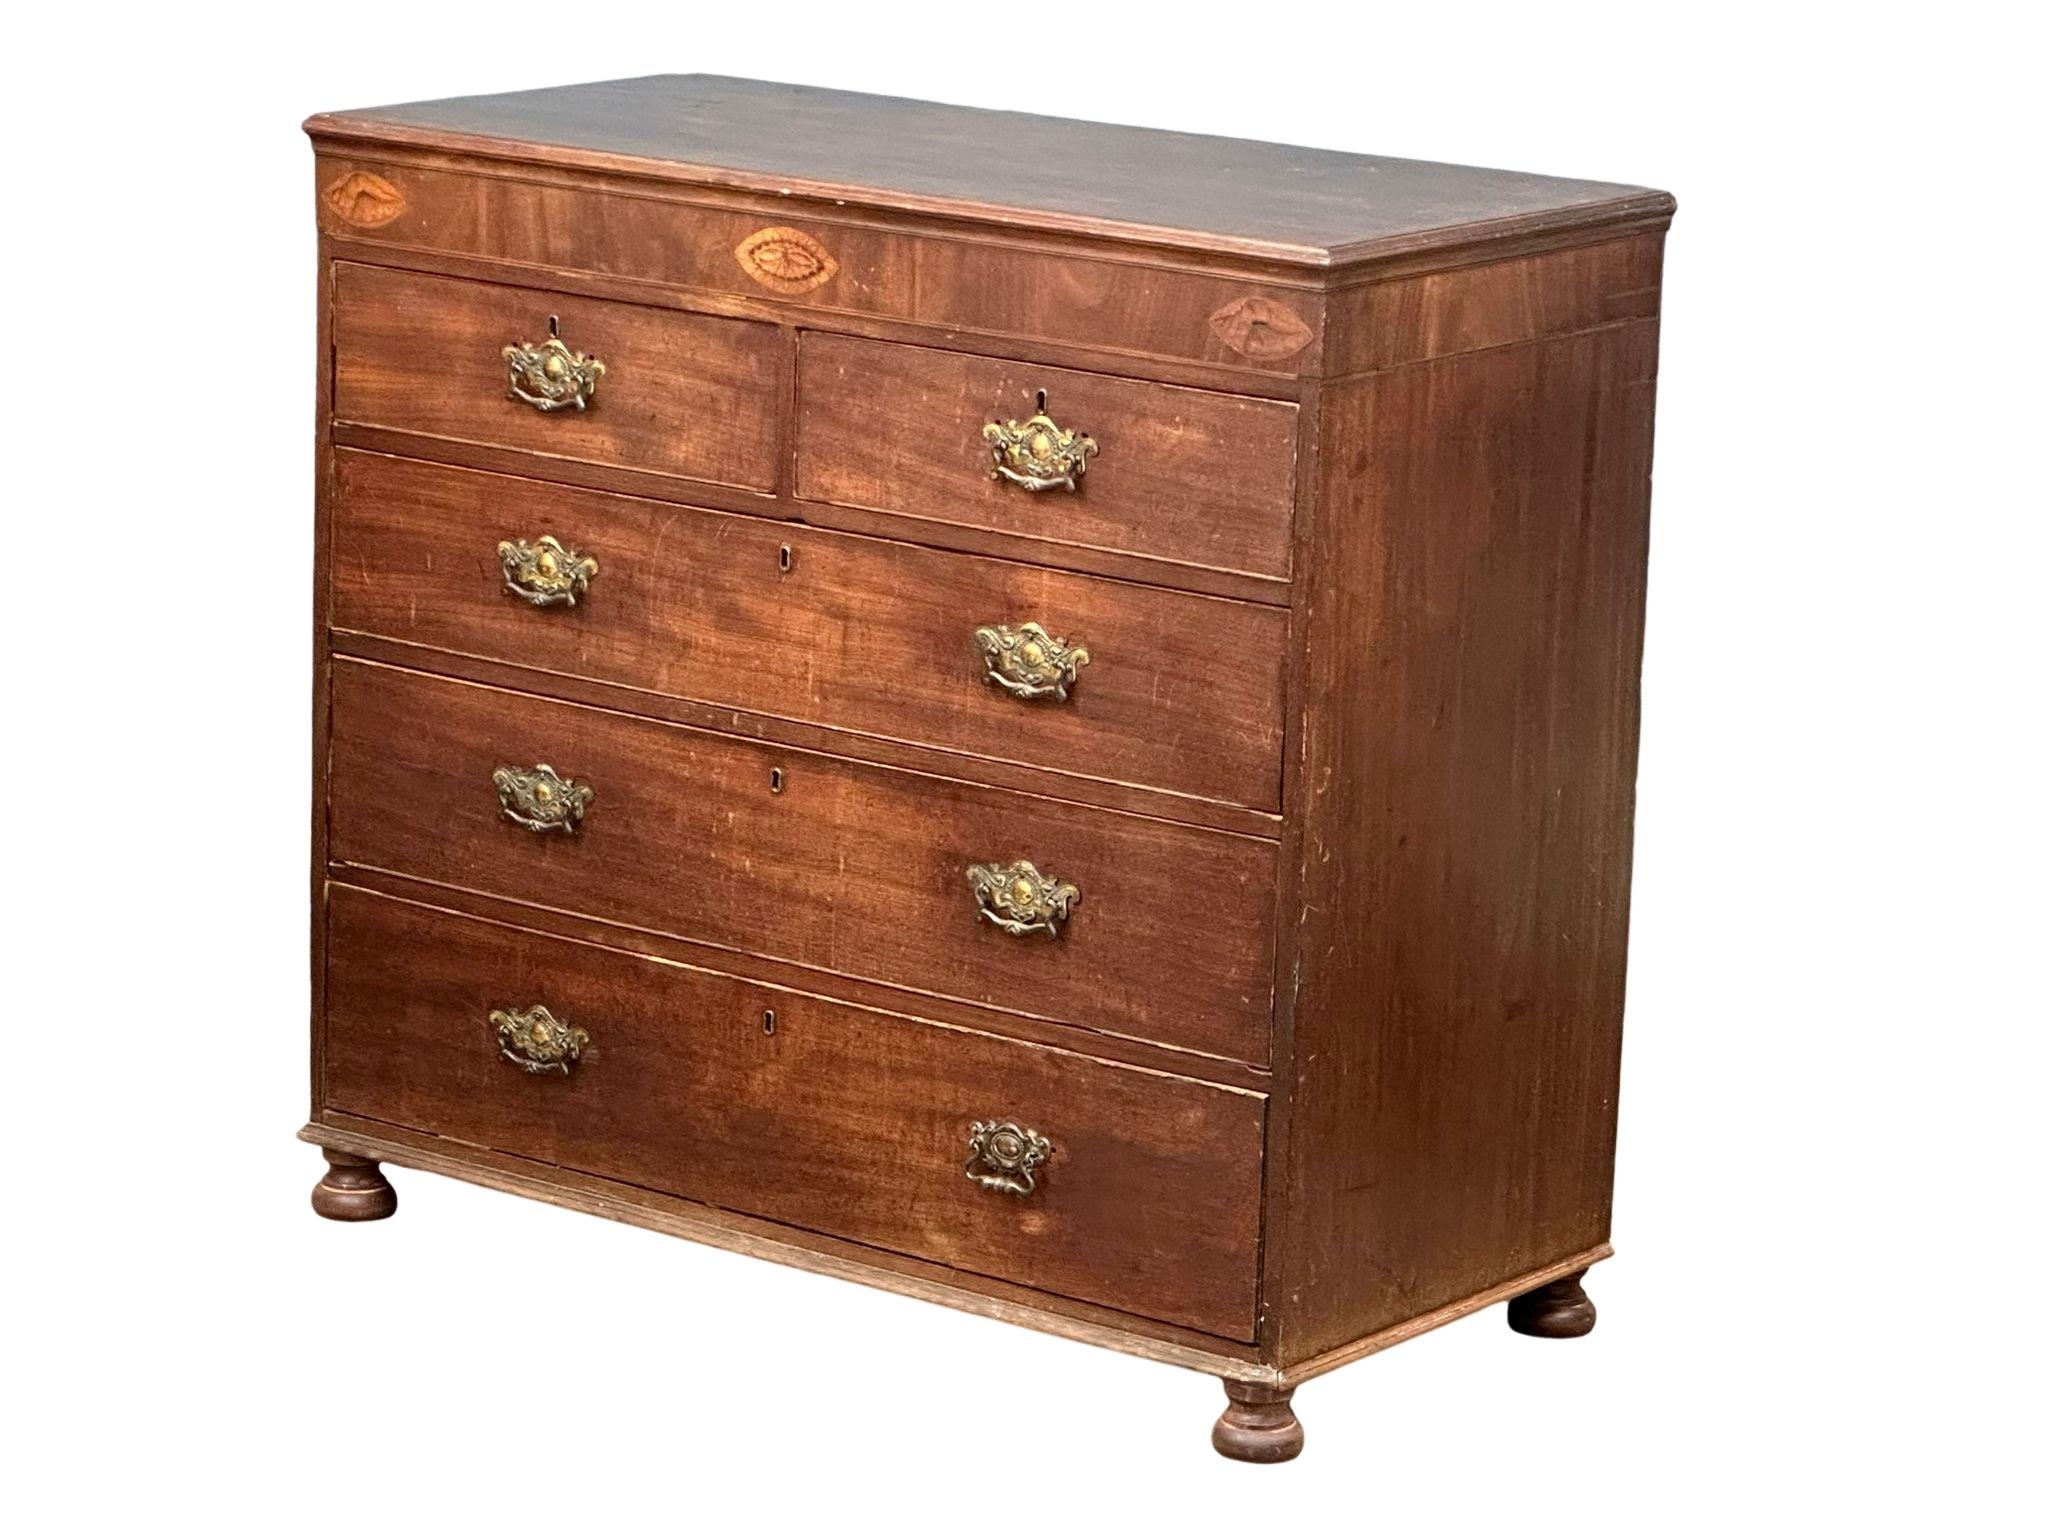 A large late George III Inlaid mahogany chest of drawers, circa 1800-20. 115cm x 55cm x 105cm - Image 6 of 8